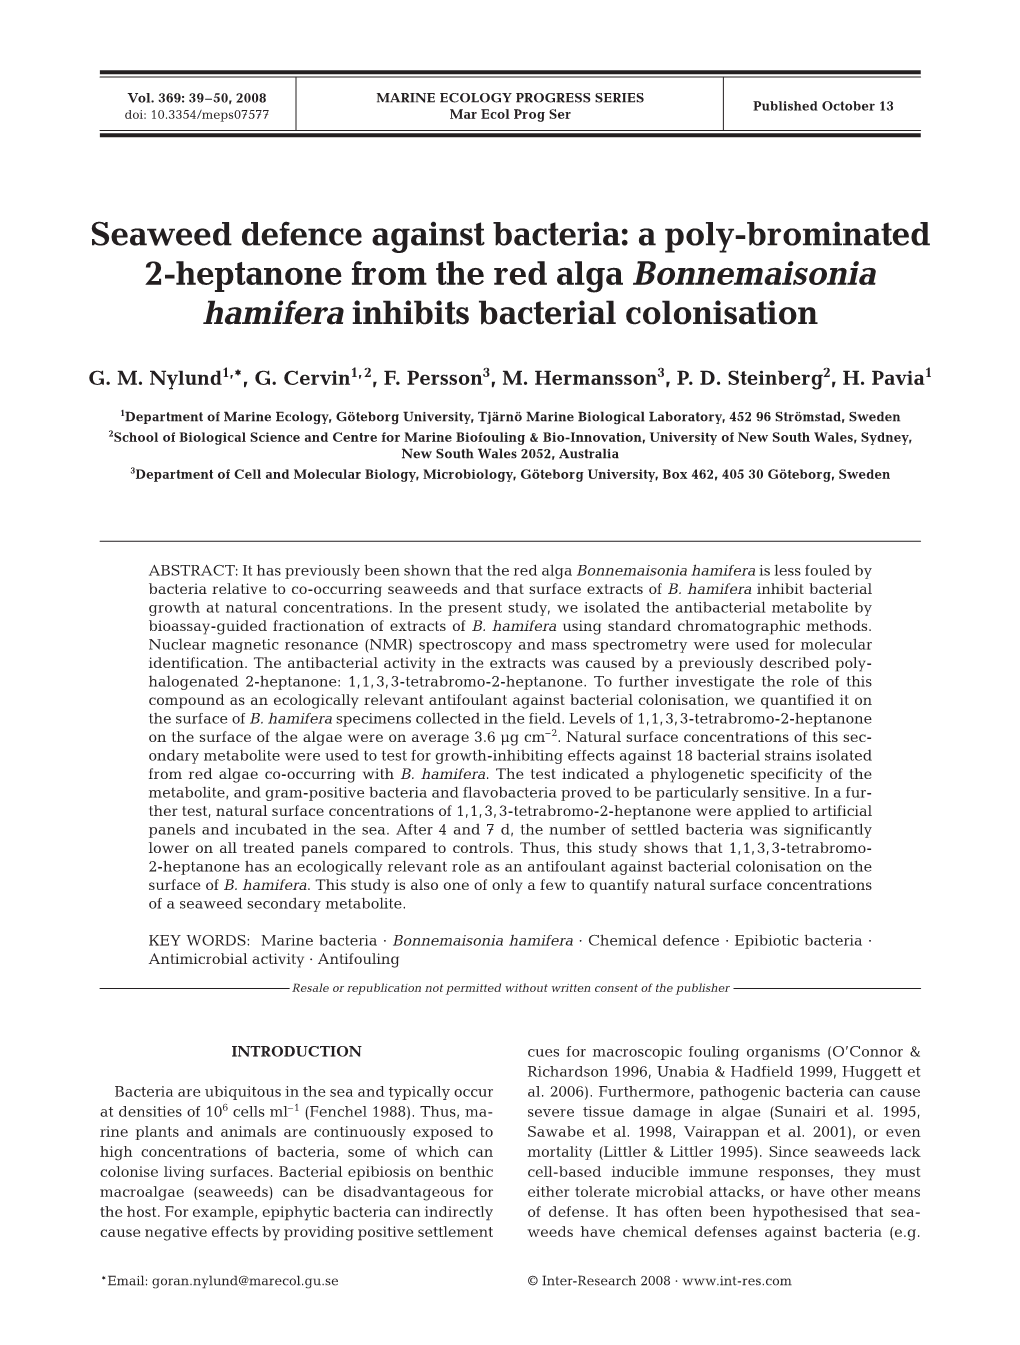 Seaweed Defence Against Bacteria: a Poly-Brominated 2-Heptanone from the Red Alga Bonnemaisonia Hamifera Inhibits Bacterial Colonisation